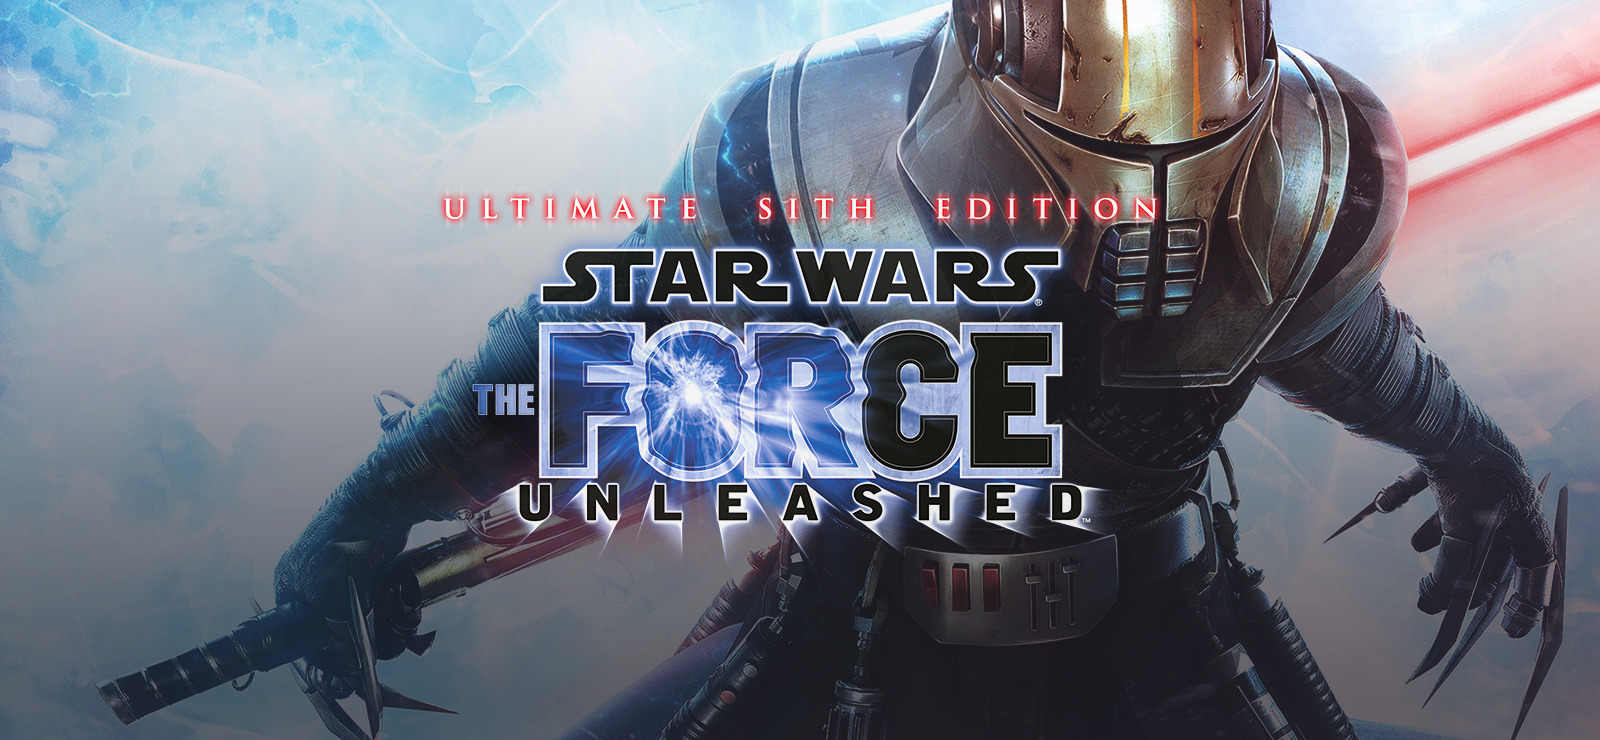 star wars the force unleashed ultimate sith edition torrent